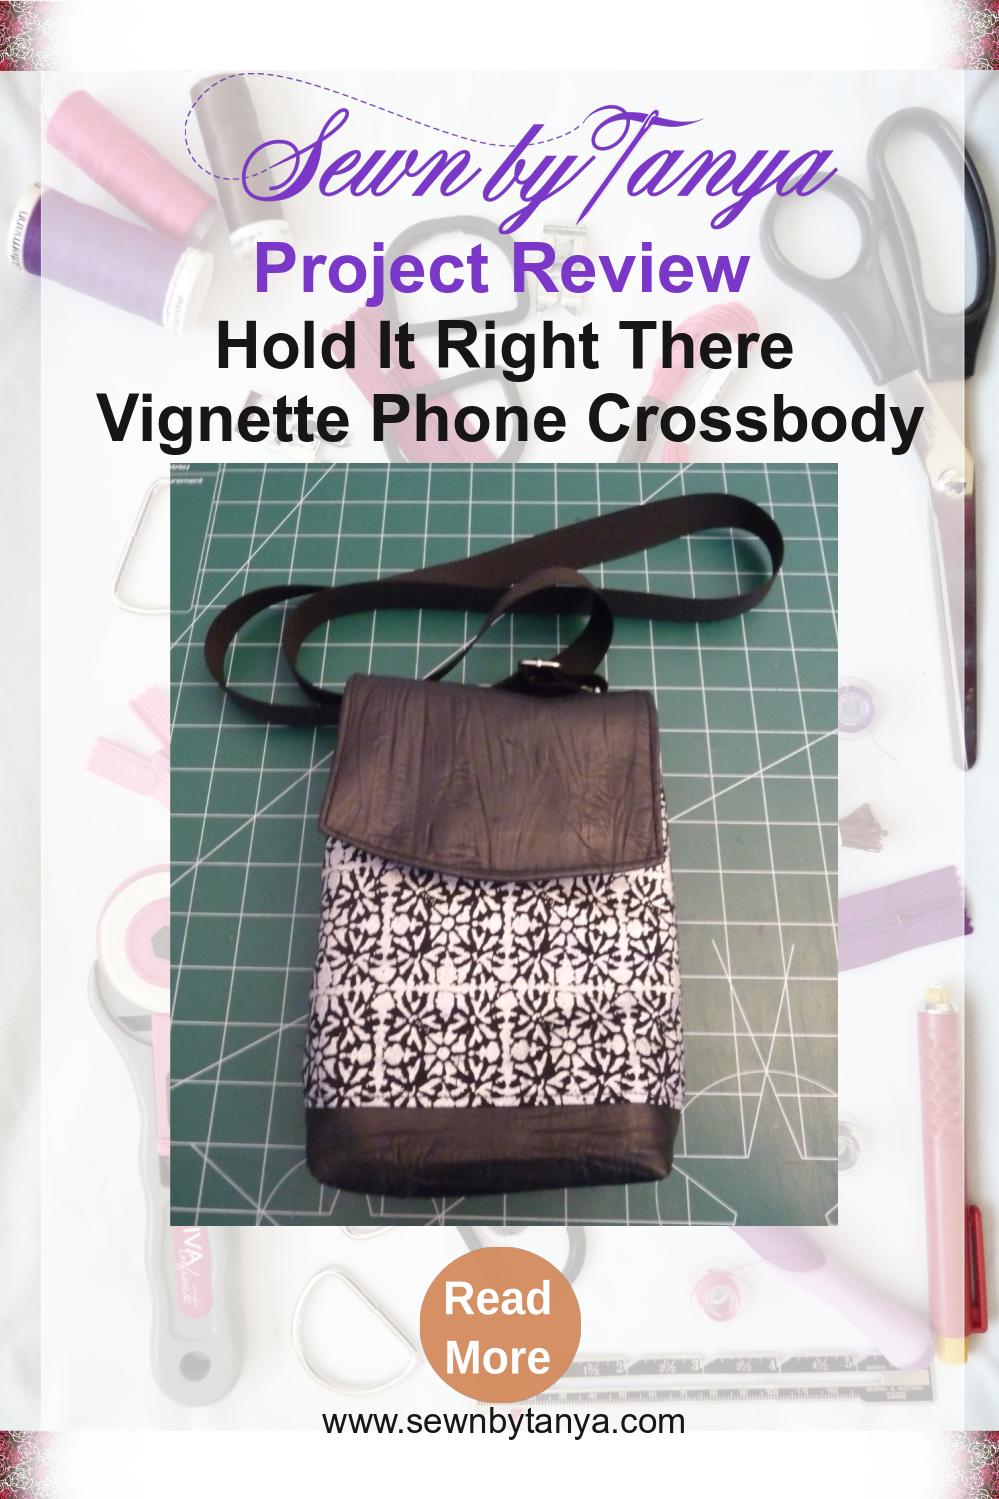 Sewn By Tanya Project Review | Vignette Phone Crossbody